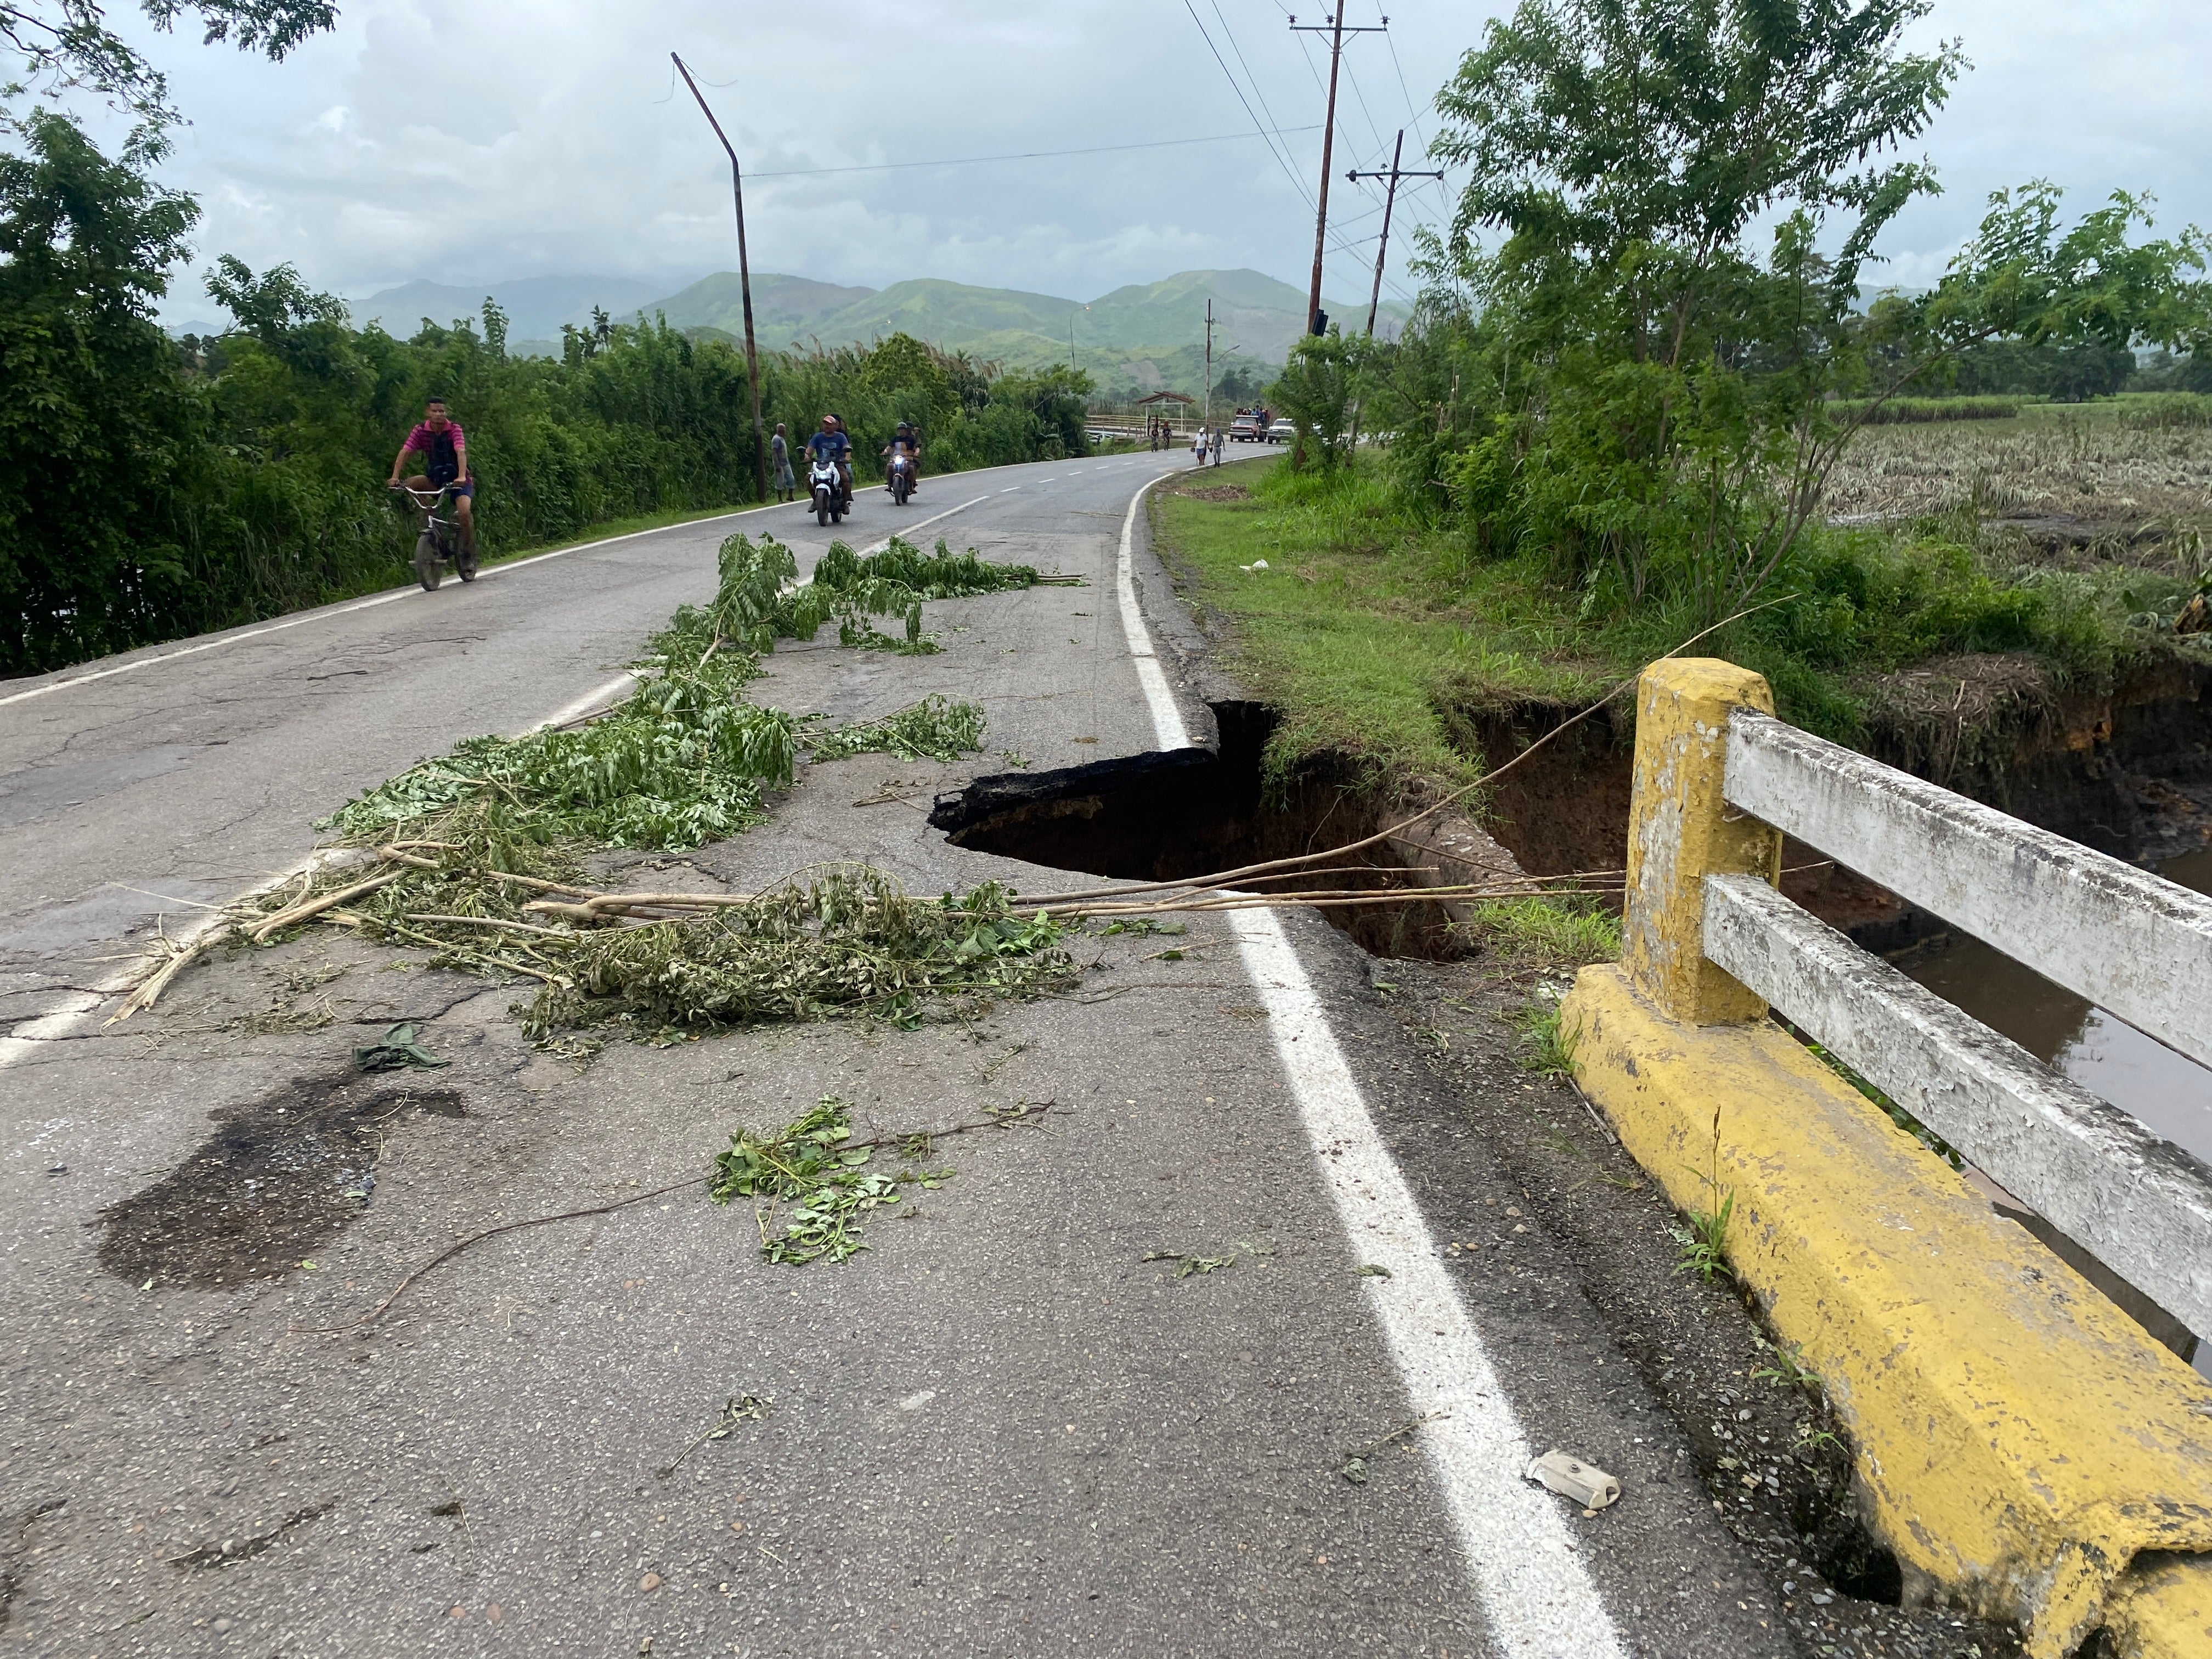 View of a damaged road after a river swelled due to heavy rains following Hurricane Beryl in Comanacoa, Sucre state, Venezuela.